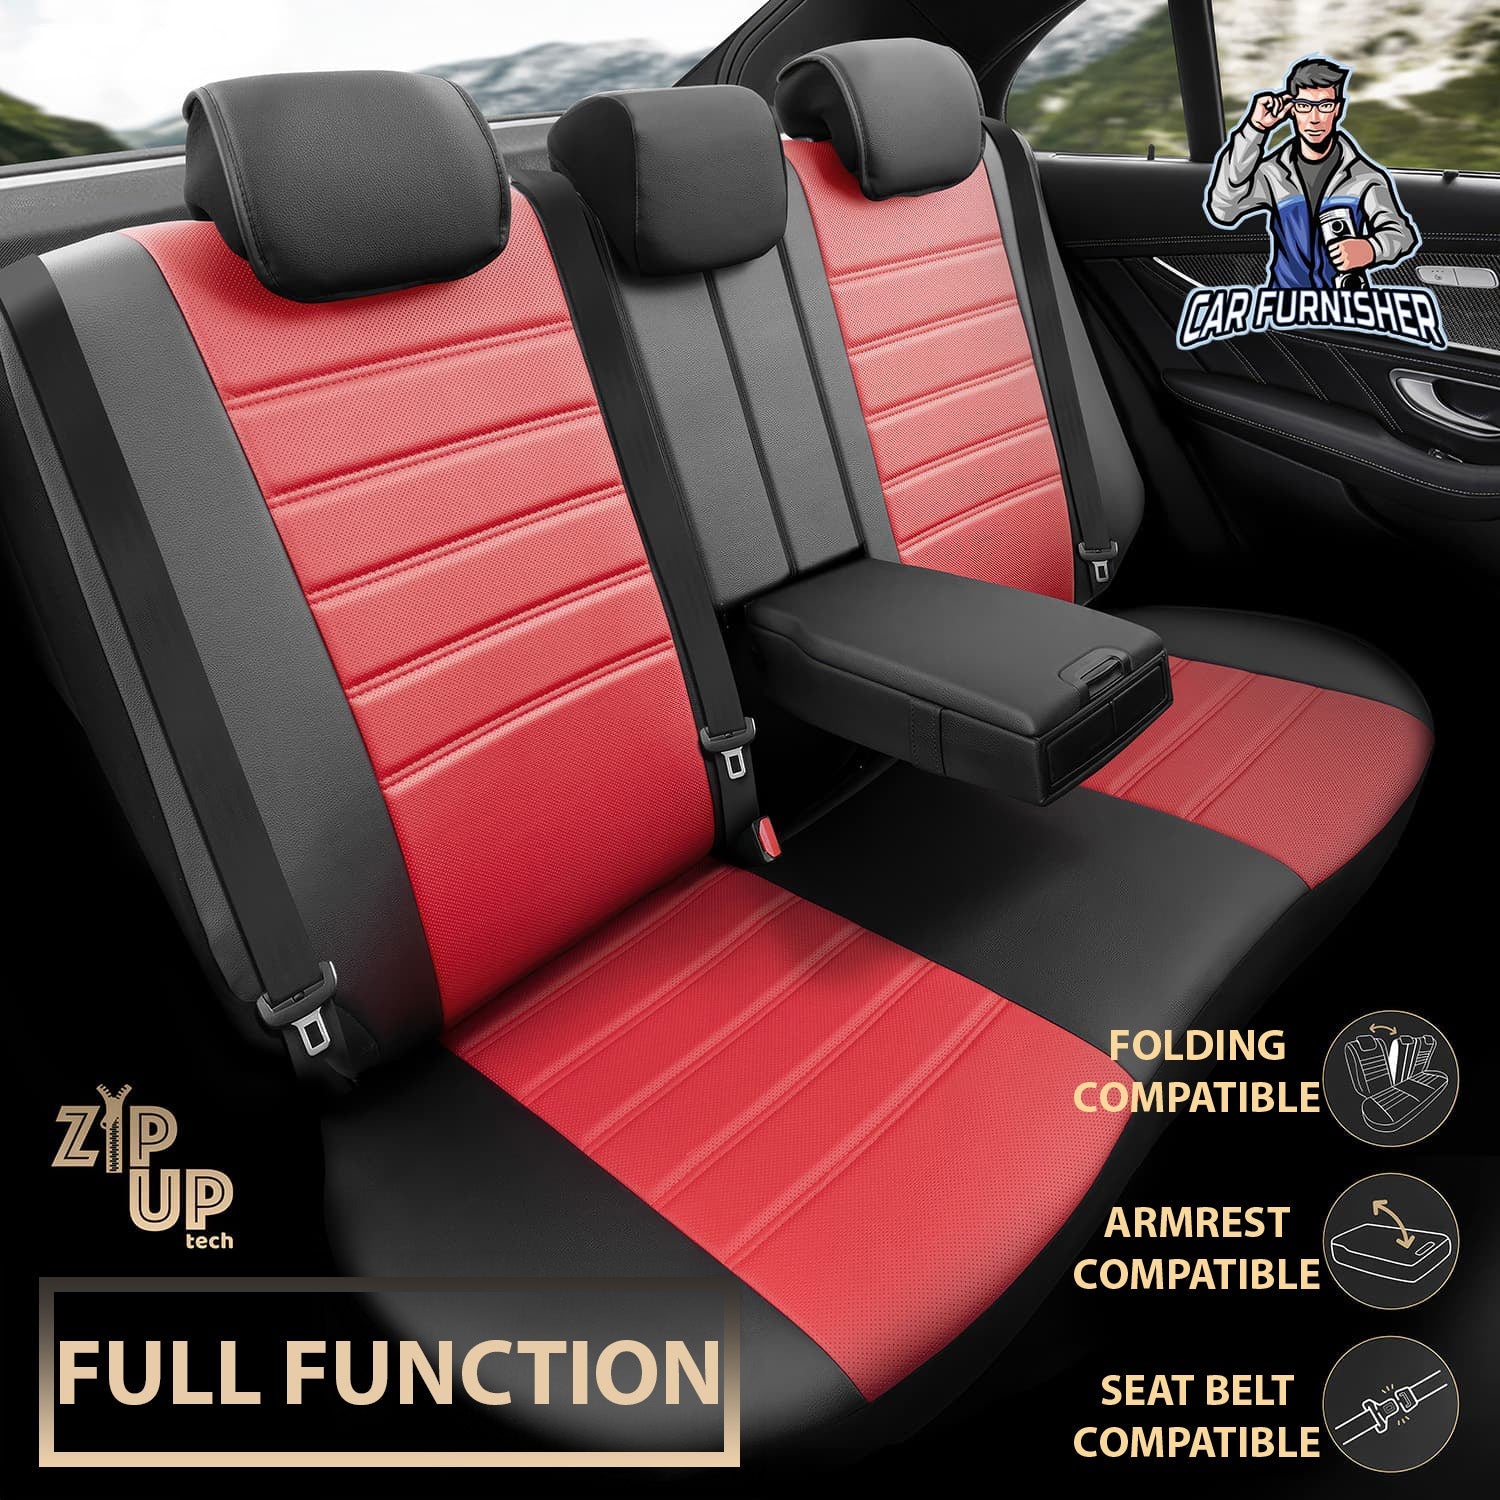 Mercedes 190 Seat Covers Inspire Design Red 5 Seats + Headrests (Full Set) Full Leather